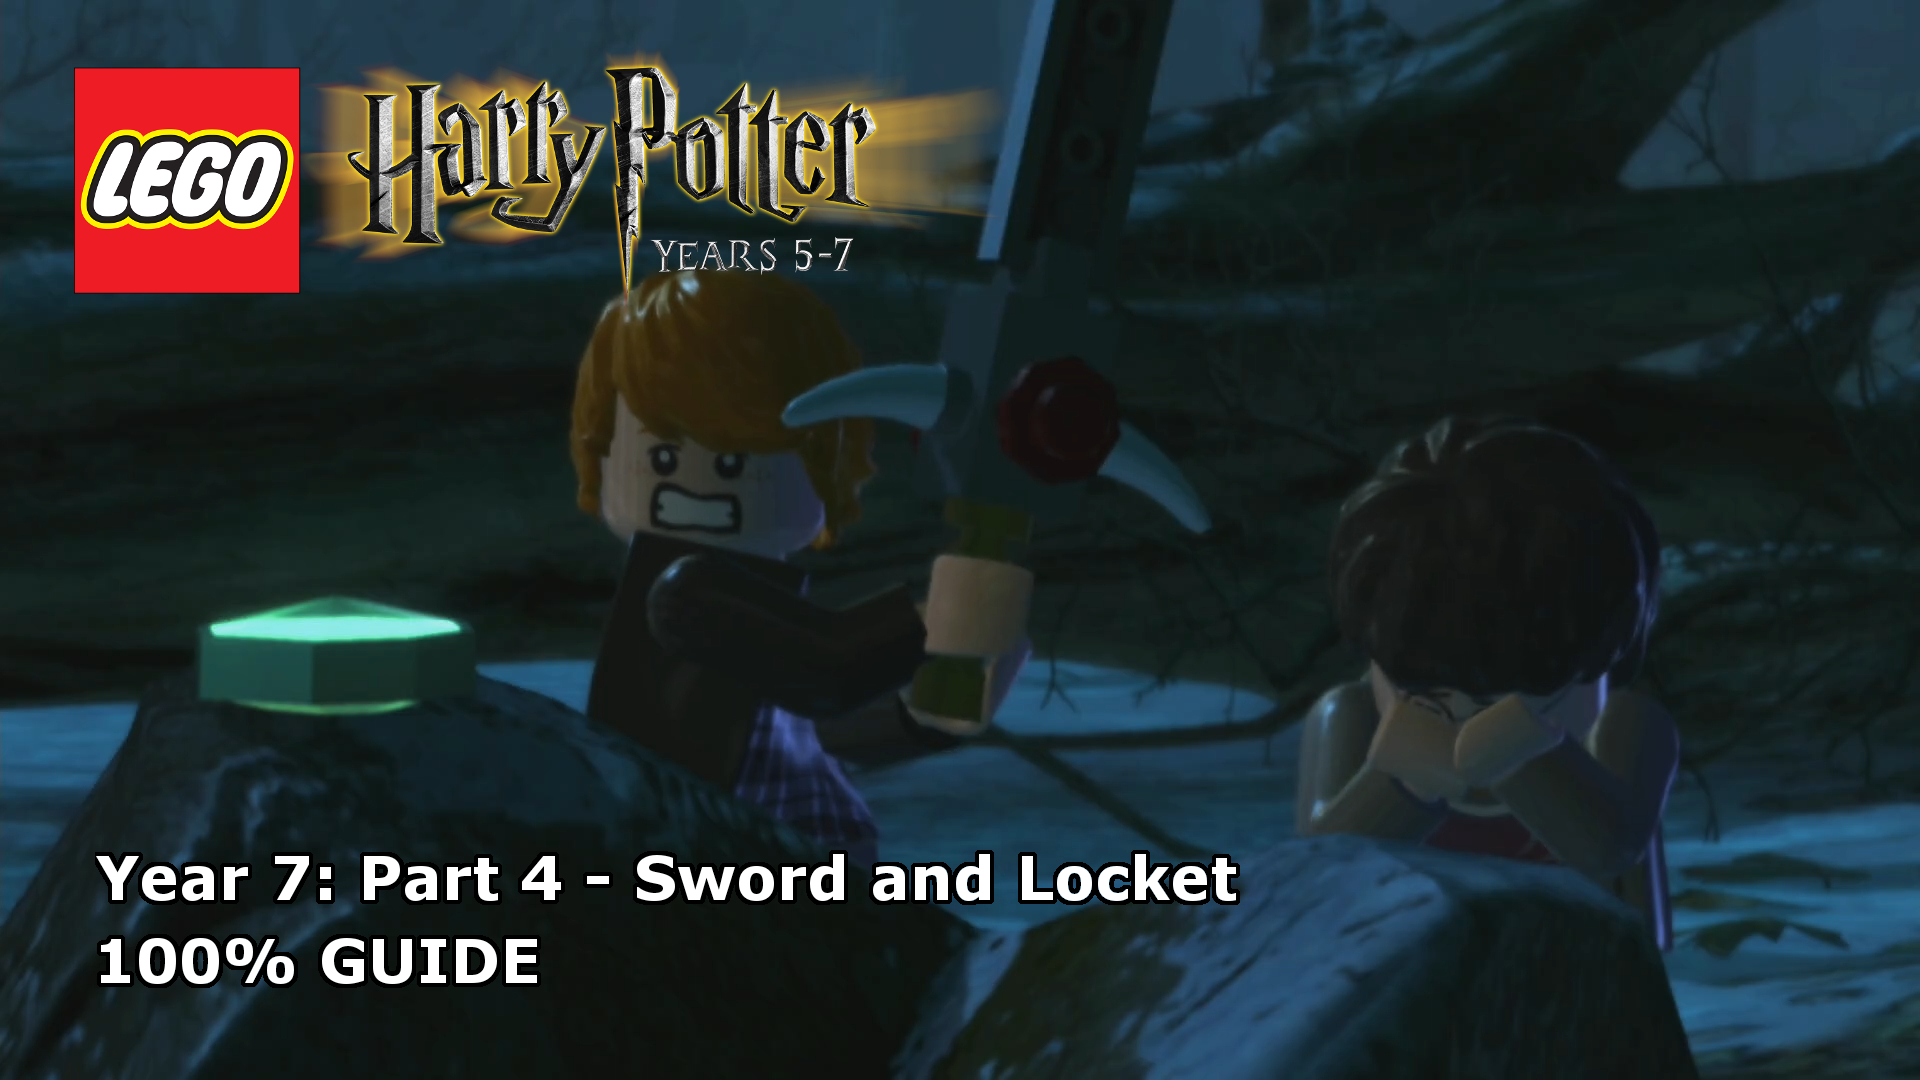 Lego Harry Potter: Years 5-7 – A Veiled Threat 100% Guide